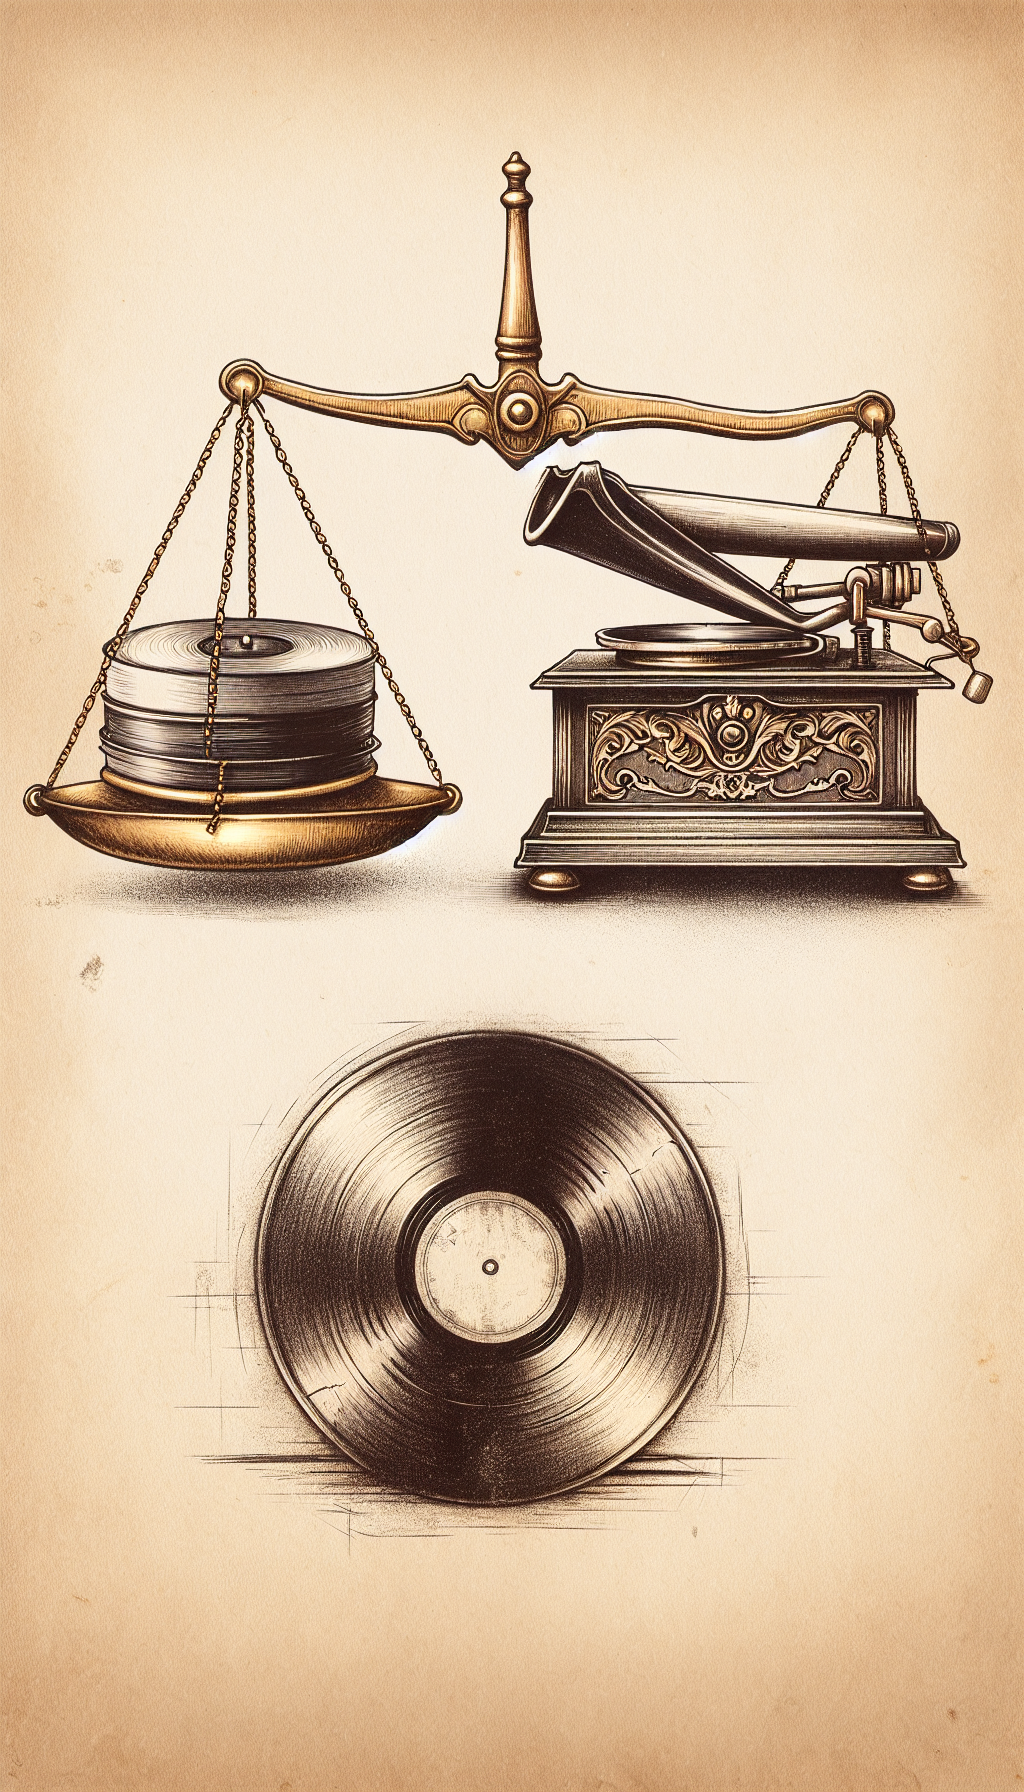 An elegant, hand-drawn sepia-toned illustration showing a pristine antique Victrola record player with shiny details on one side, gradually transitioning into a rougher, sketch-like drawing of a neglected, dusty version on the other side. A golden scale above balances a mint condition vinyl and a worn-out record, symbolizing how the state and quality of antiques directly influence their value.